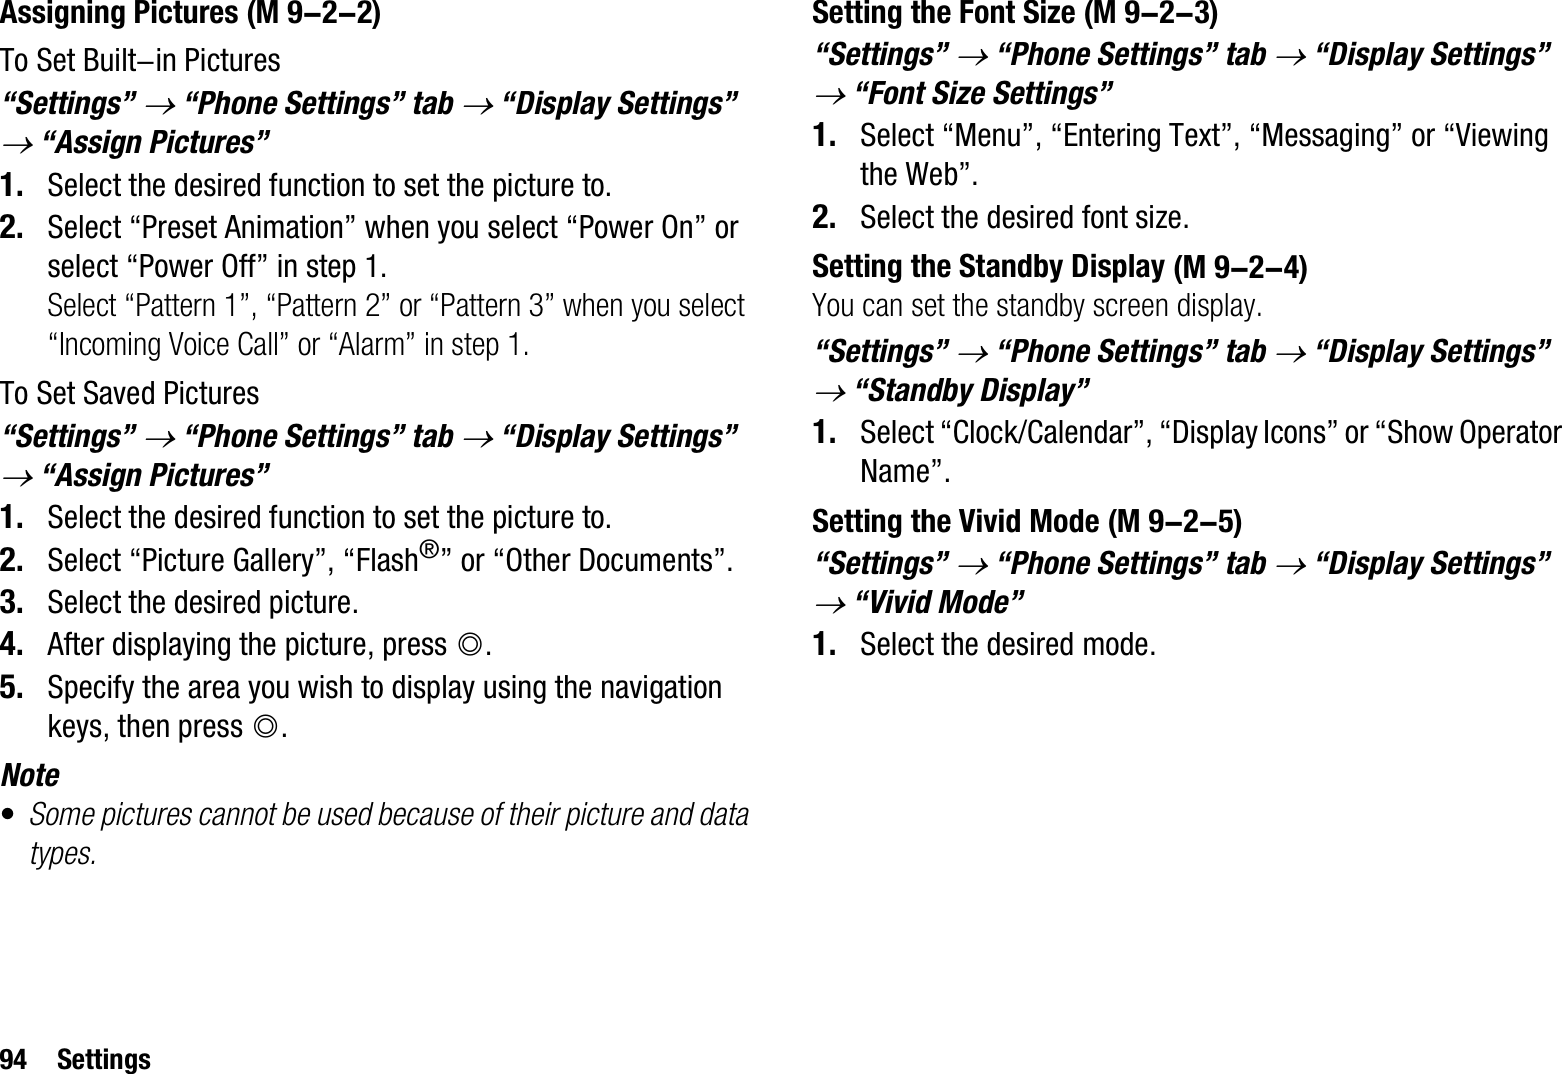 94 SettingsAssigning PicturesTo Set Built-in Pictures“Settings” o “Phone Settings” tab o “Display Settings” o “Assign Pictures”1. Select the desired function to set the picture to.2. Select “Preset Animation” when you select “Power On” or select “Power Off” in step 1.Select “Pattern 1”, “Pattern 2” or “Pattern 3” when you select “Incoming Voice Call” or “Alarm” in step 1.To Set Saved Pictures“Settings” o “Phone Settings” tab o “Display Settings” o “Assign Pictures”1. Select the desired function to set the picture to.2. Select “Picture Gallery”, “Flash®” or “Other Documents”.3. Select the desired picture.4. After displaying the picture, press B.5. Specify the area you wish to display using the navigation keys, then press B.Note•Some pictures cannot be used because of their picture and data types.Setting the Font Size“Settings” o “Phone Settings” tab o “Display Settings” o “Font Size Settings”1. Select “Menu”, “Entering Text”, “Messaging” or “Viewing the Web”.2. Select the desired font size.Setting the Standby DisplayYou can set the standby screen display.“Settings” o “Phone Settings” tab o “Display Settings” o “Standby Display” 1. Select “Clock/Calendar”, “Display Icons” or “Show Operator Name”.Setting the Vivid Mode“Settings” o “Phone Settings” tab o “Display Settings” o “Vivid Mode”1. Select the desired mode. (M 9-2-2)  (M 9-2-3) (M 9-2-4) (M 9-2-5)